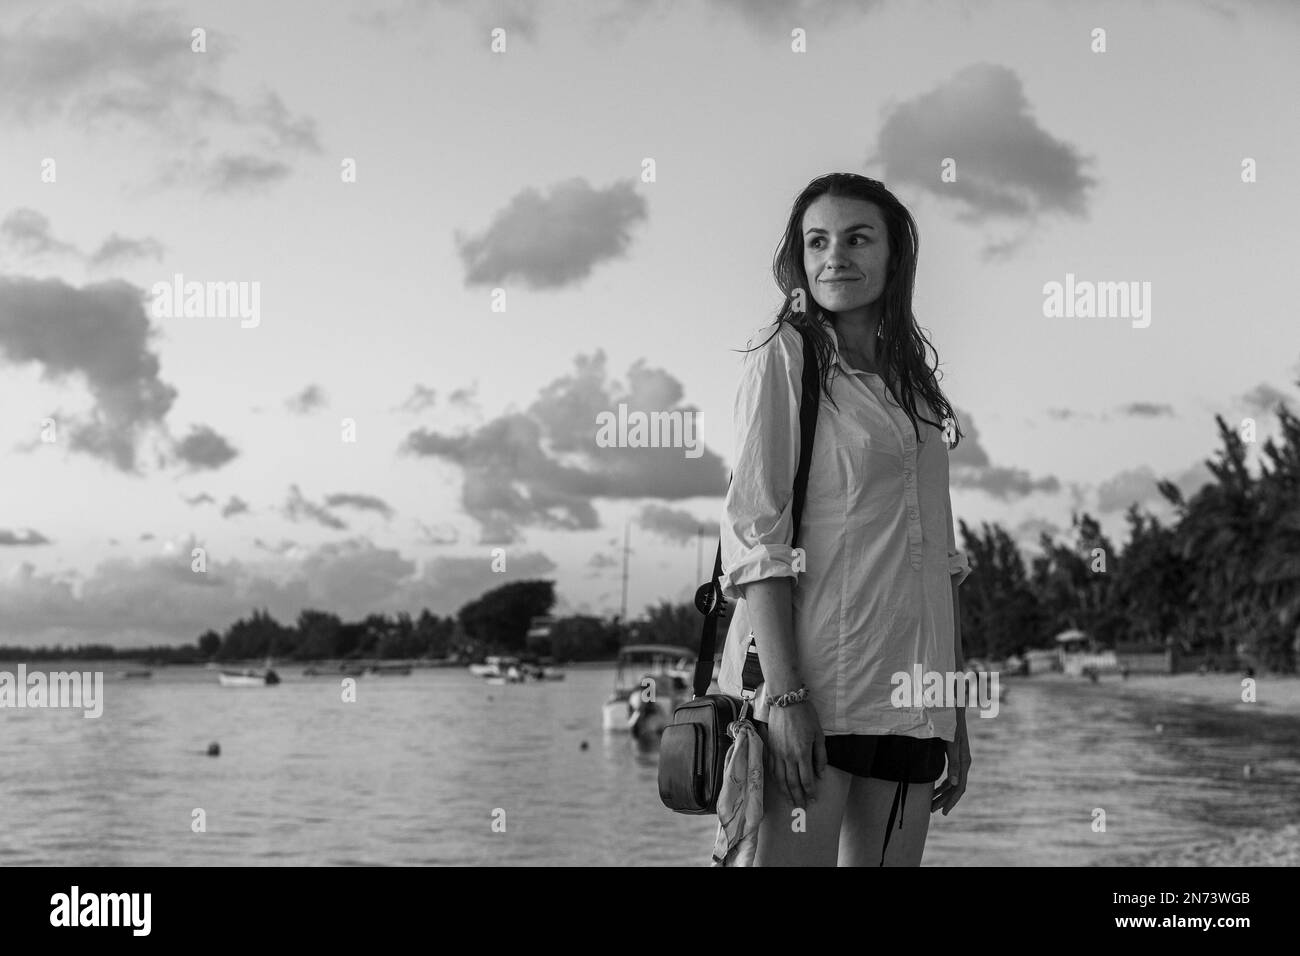 A young female model enjoying the evening sun at one of the beaches at the westcoast of mauritius island, Africa Stock Photo